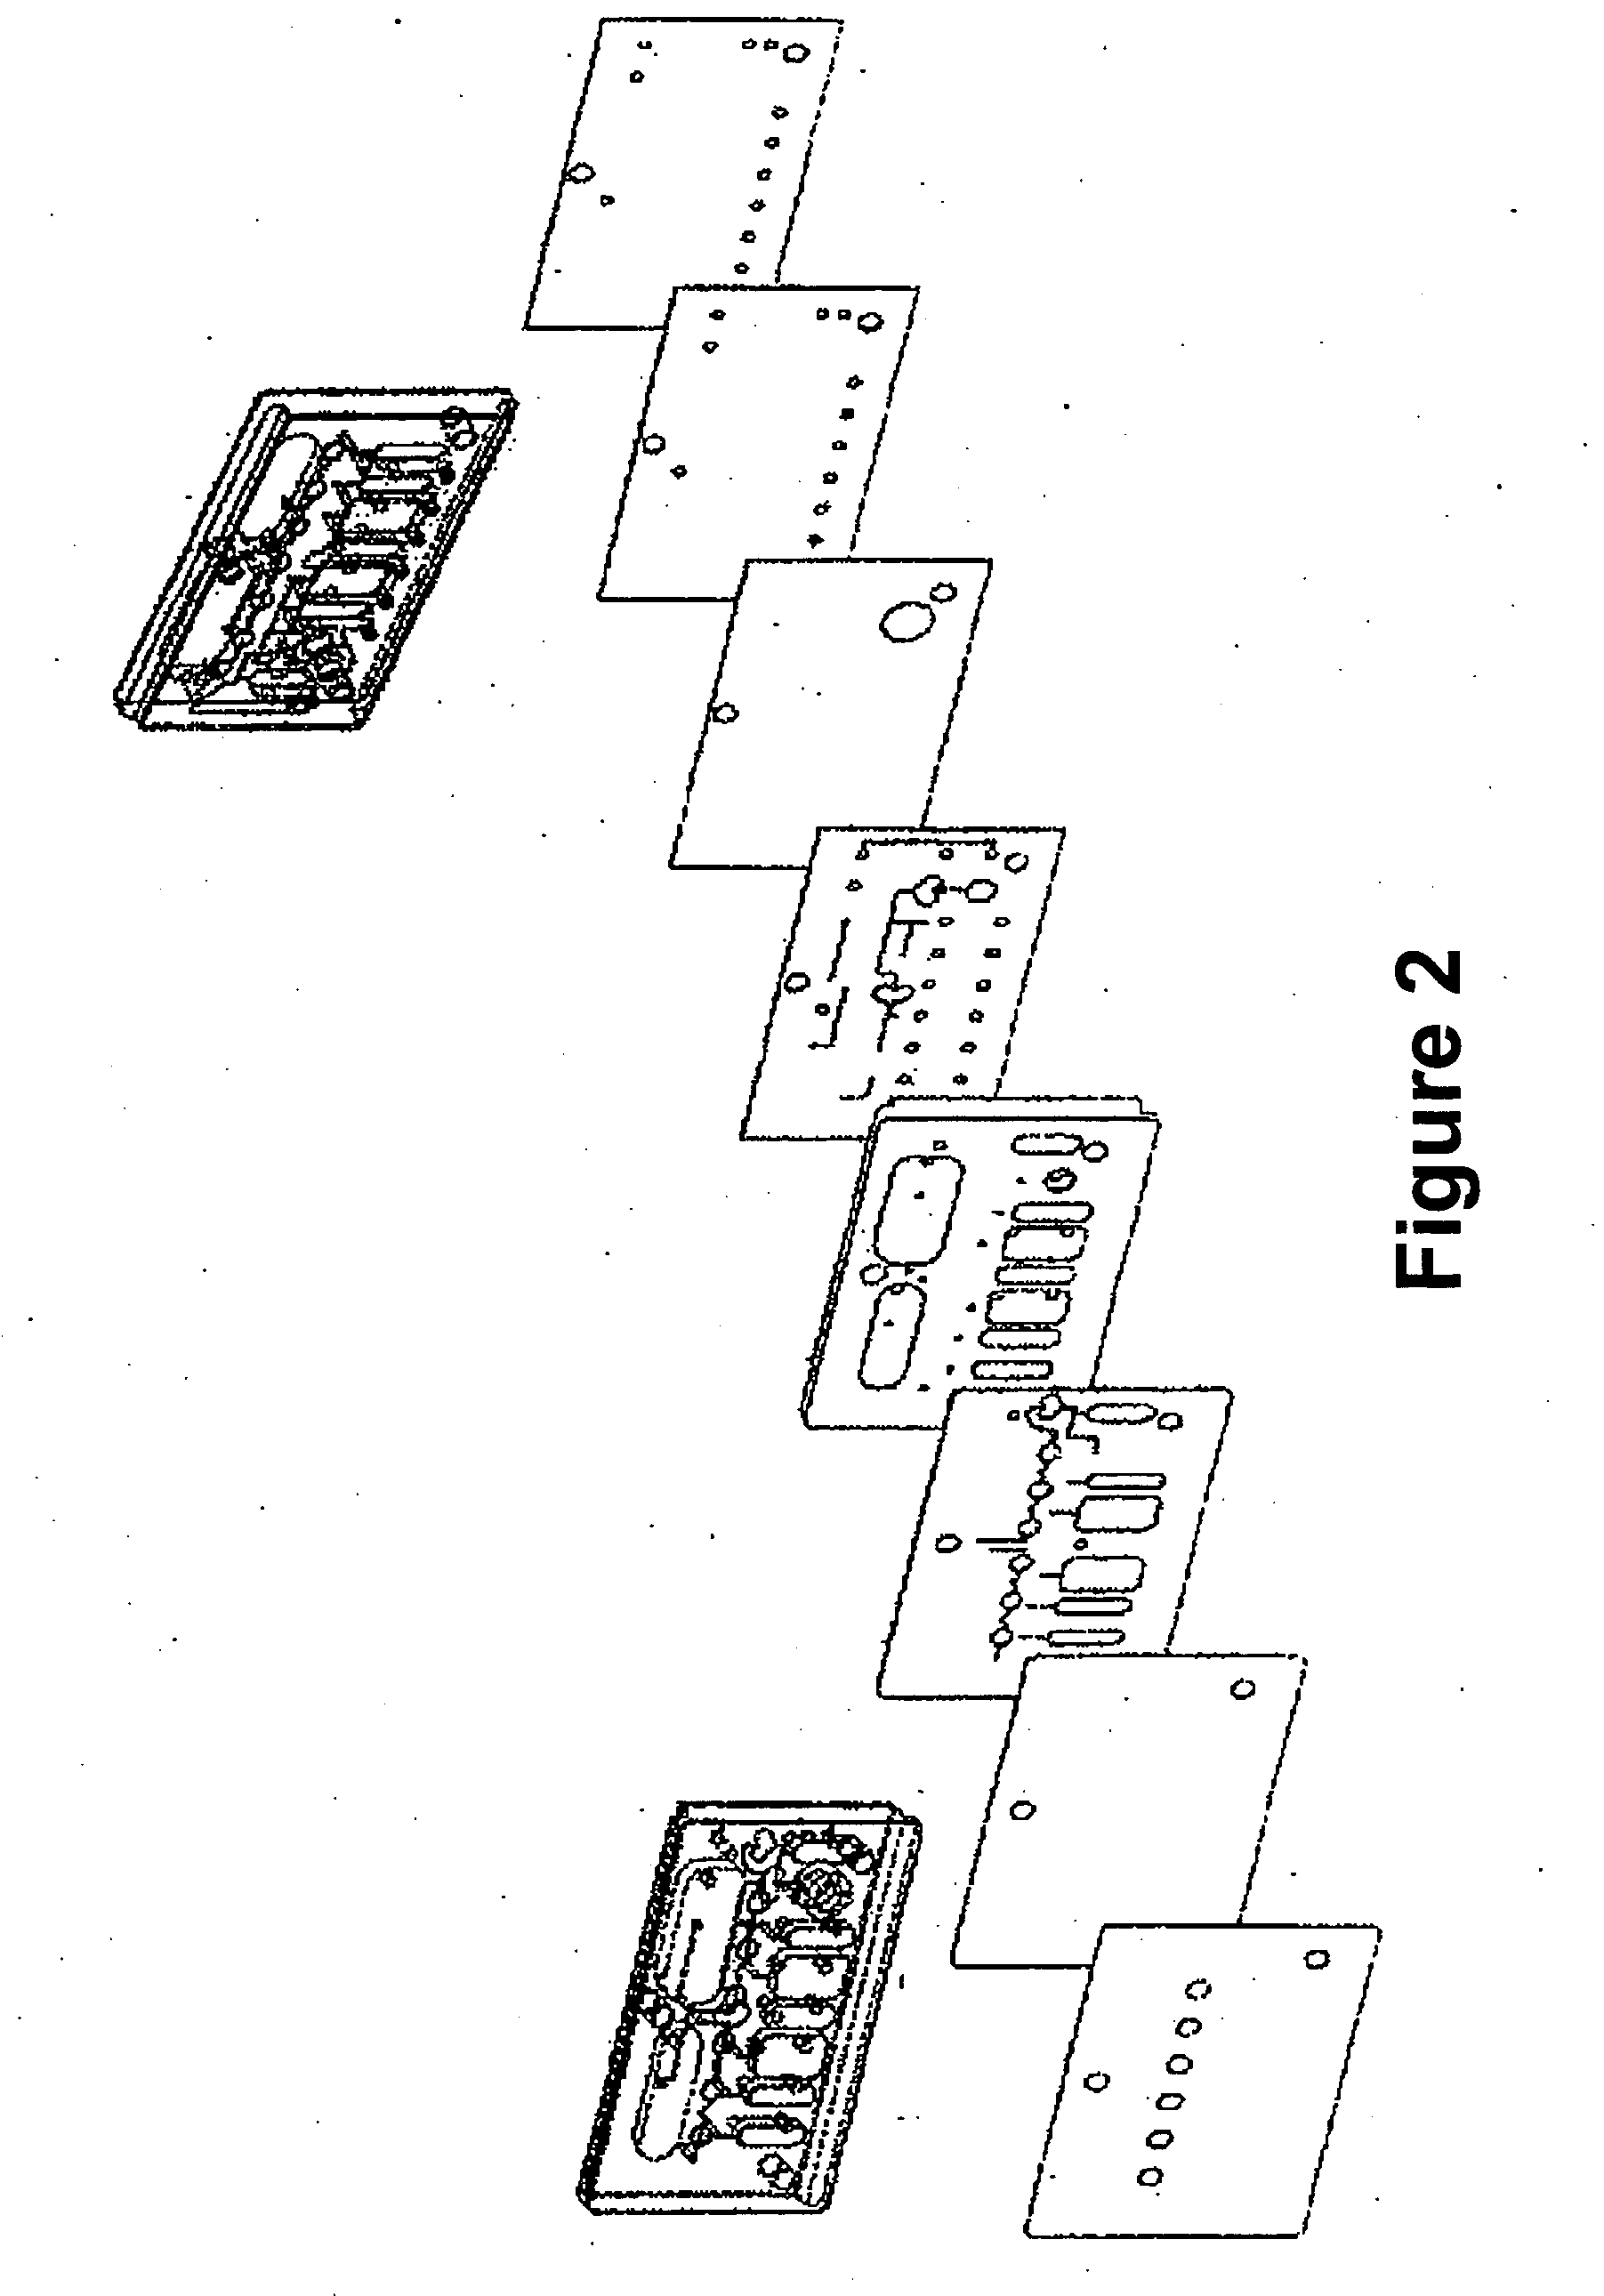 Systems and methods for improving medical treatments